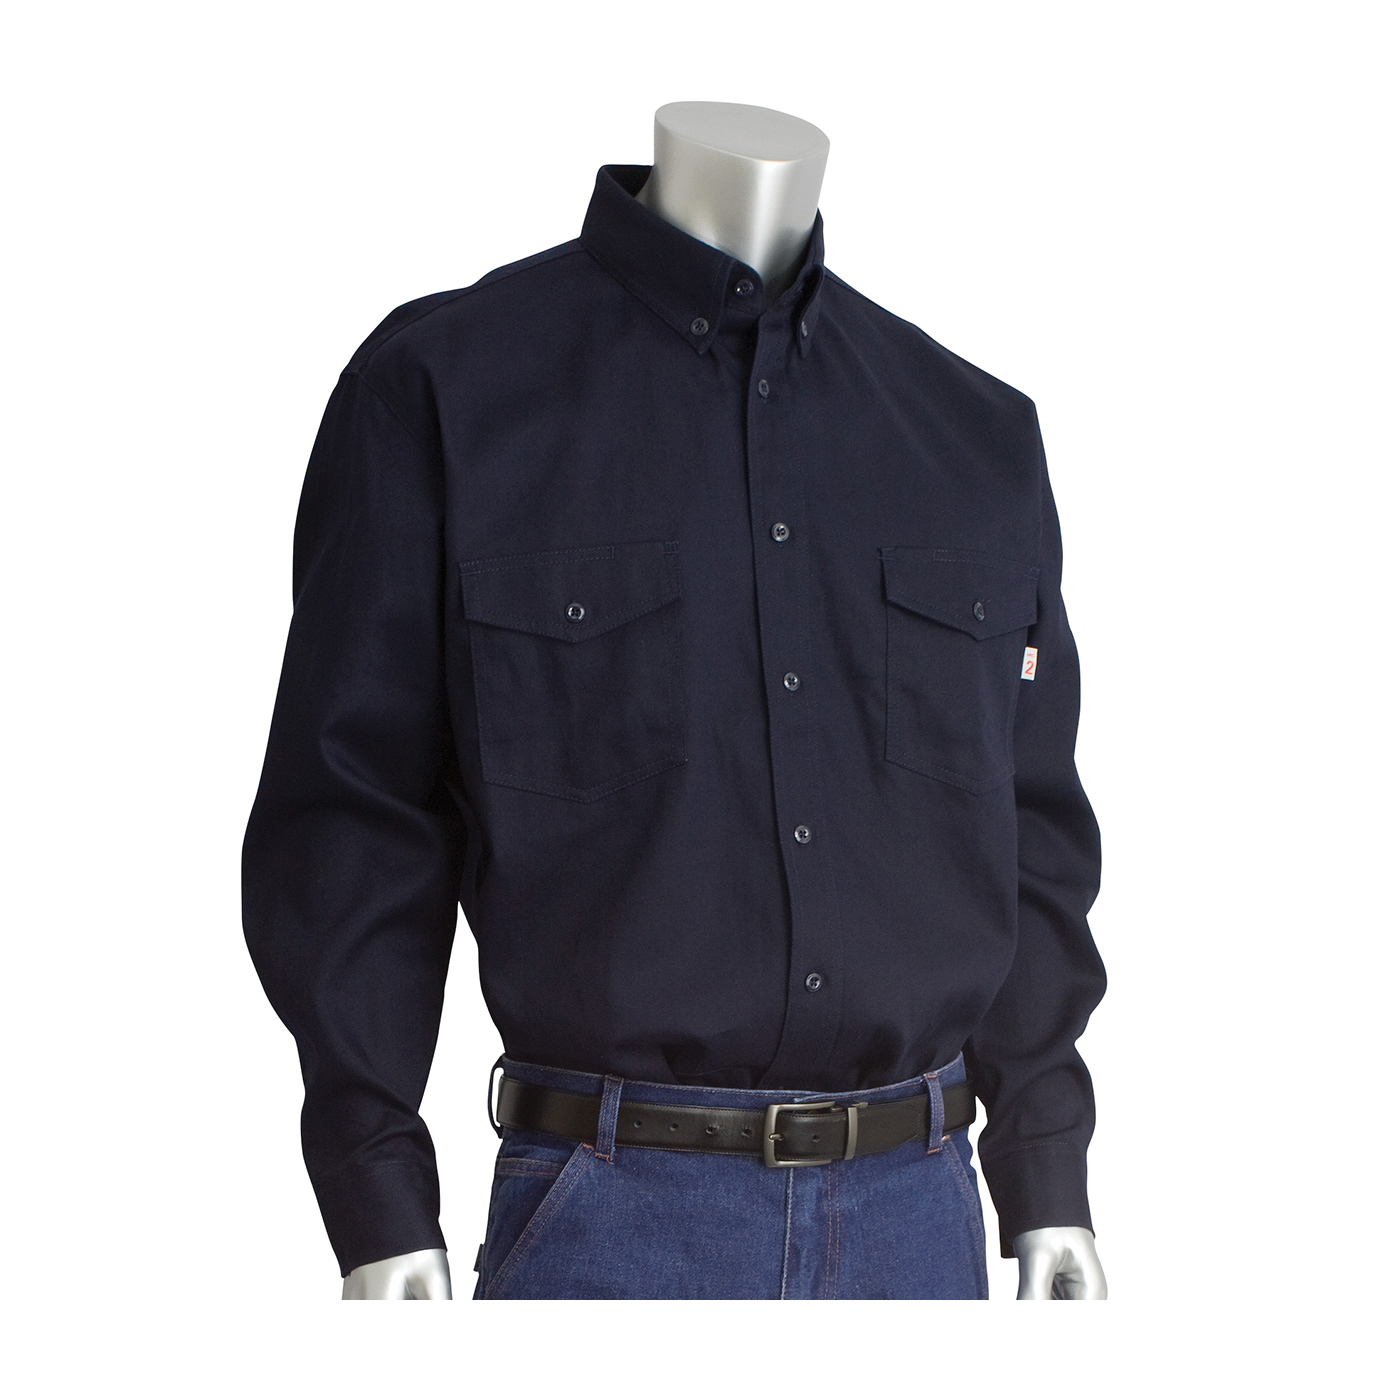 PIP® 385-FRWS-NV/3X Arc and Flame-Resistant Long Sleeve Work Shirt, 3XL, Navy Blue, 35-1/2 in L, 90% Cotton/10% Nylon